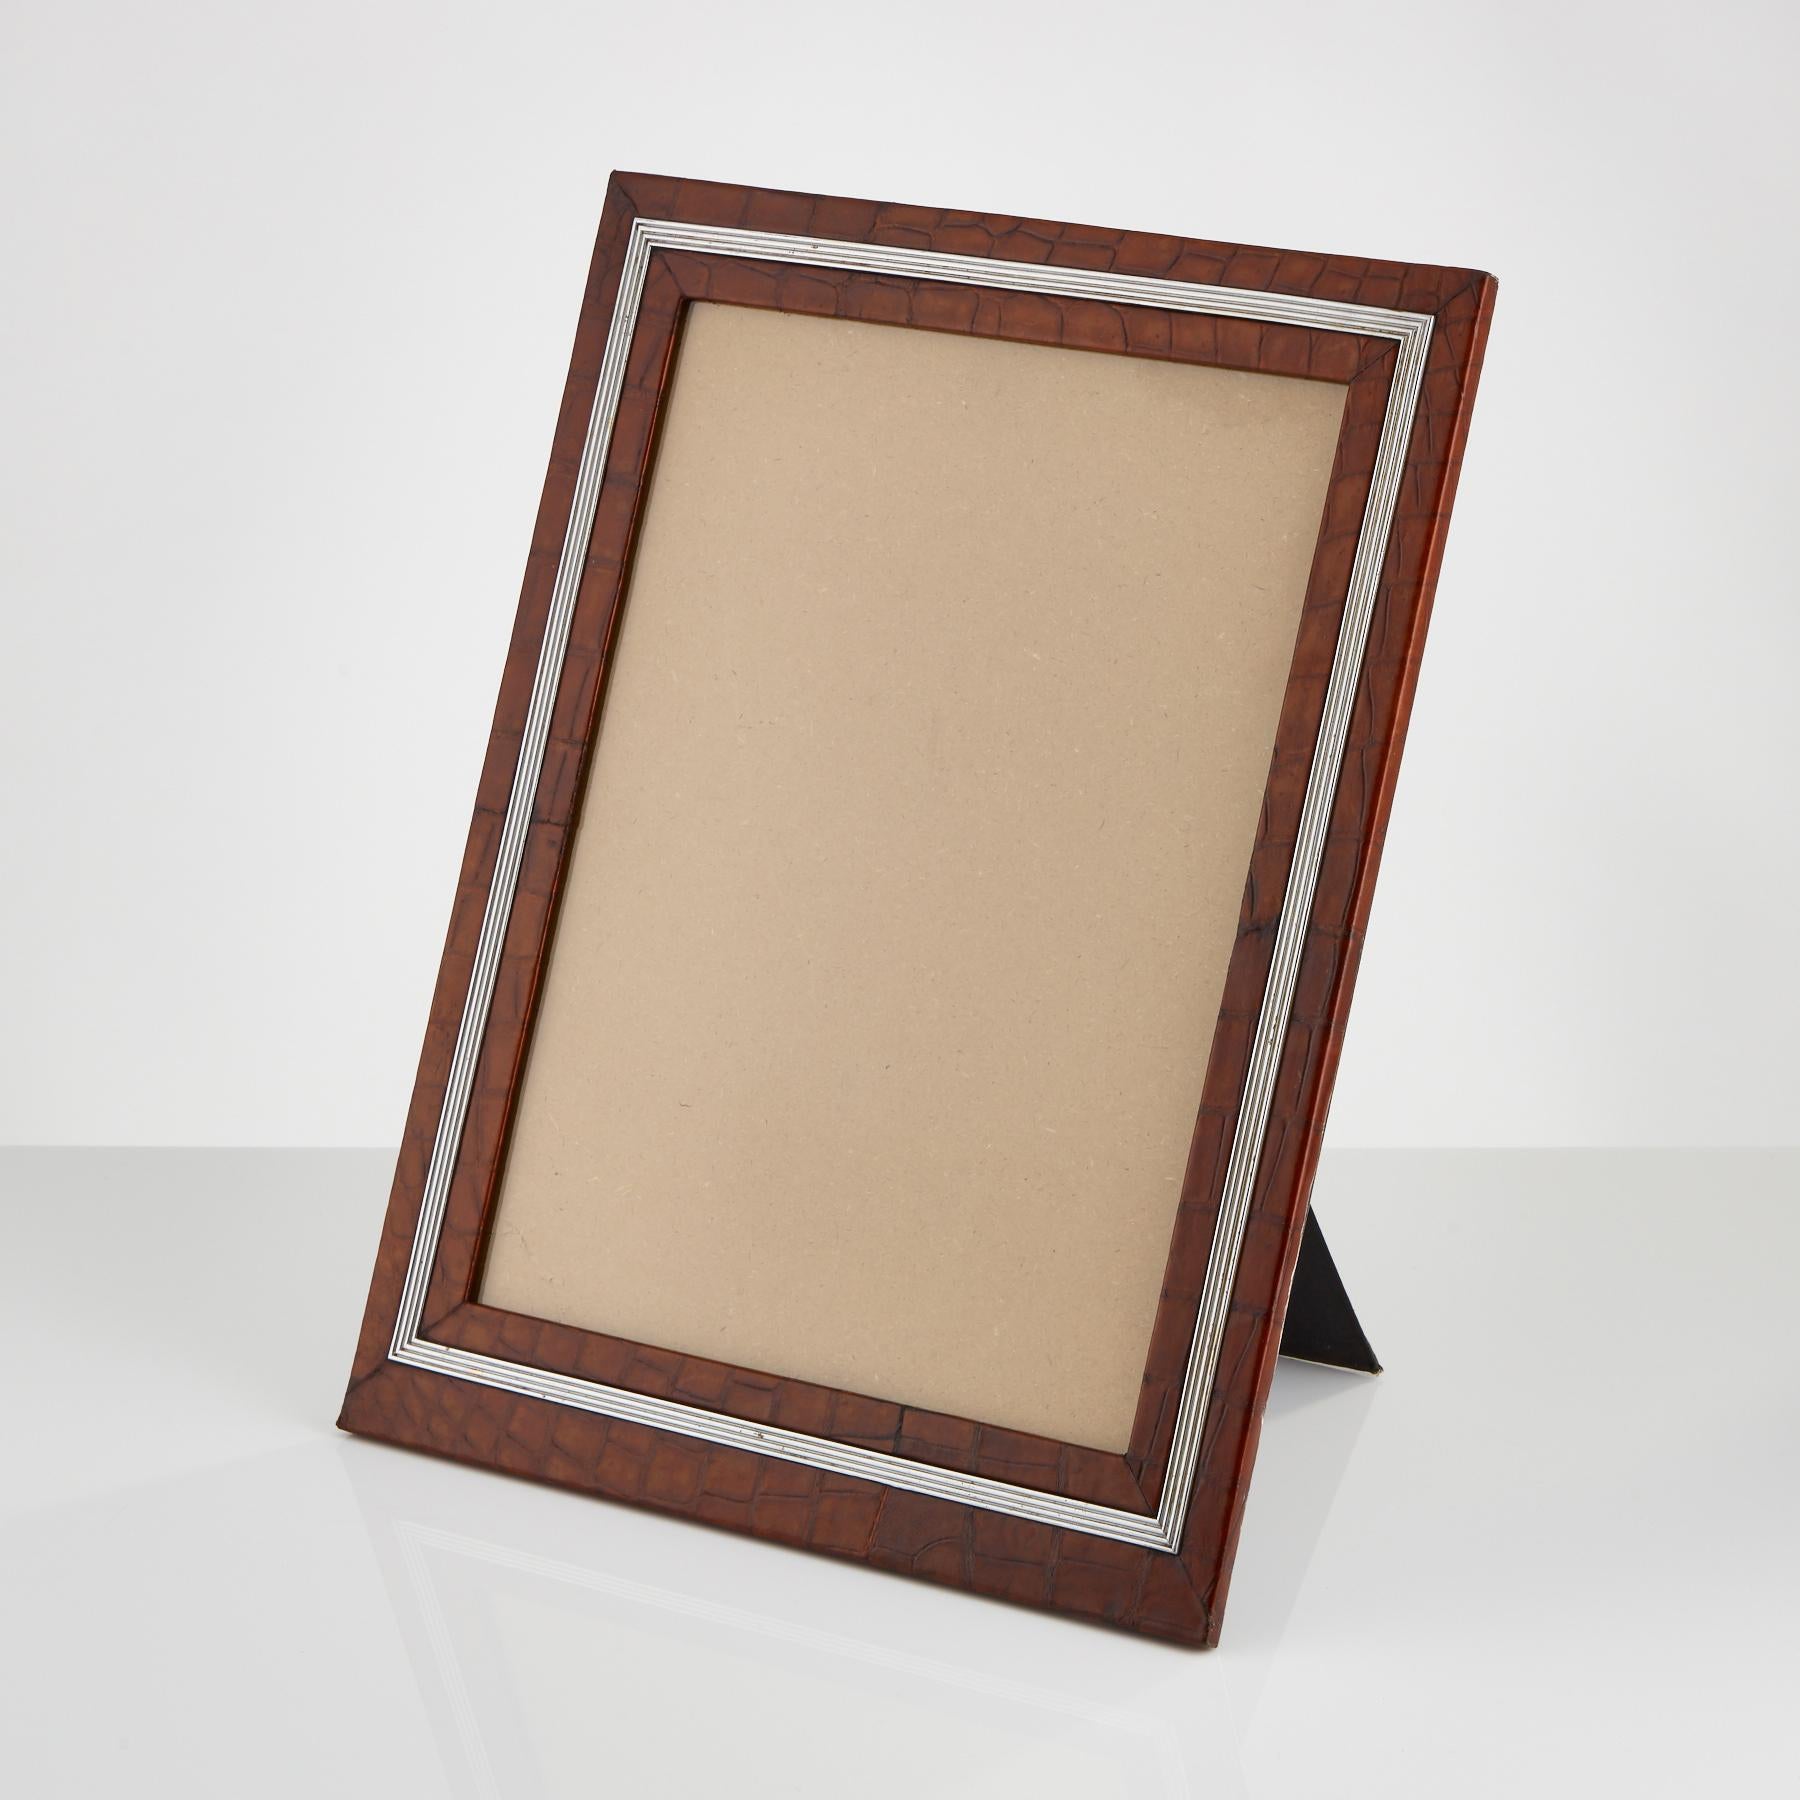 An early 20th century large crocodile photo frame with applied ribbed border, circa 1910-1915
The fine crocodile skin is in excellent condition and the colour is called London tan.
Also retains its original back and strut.